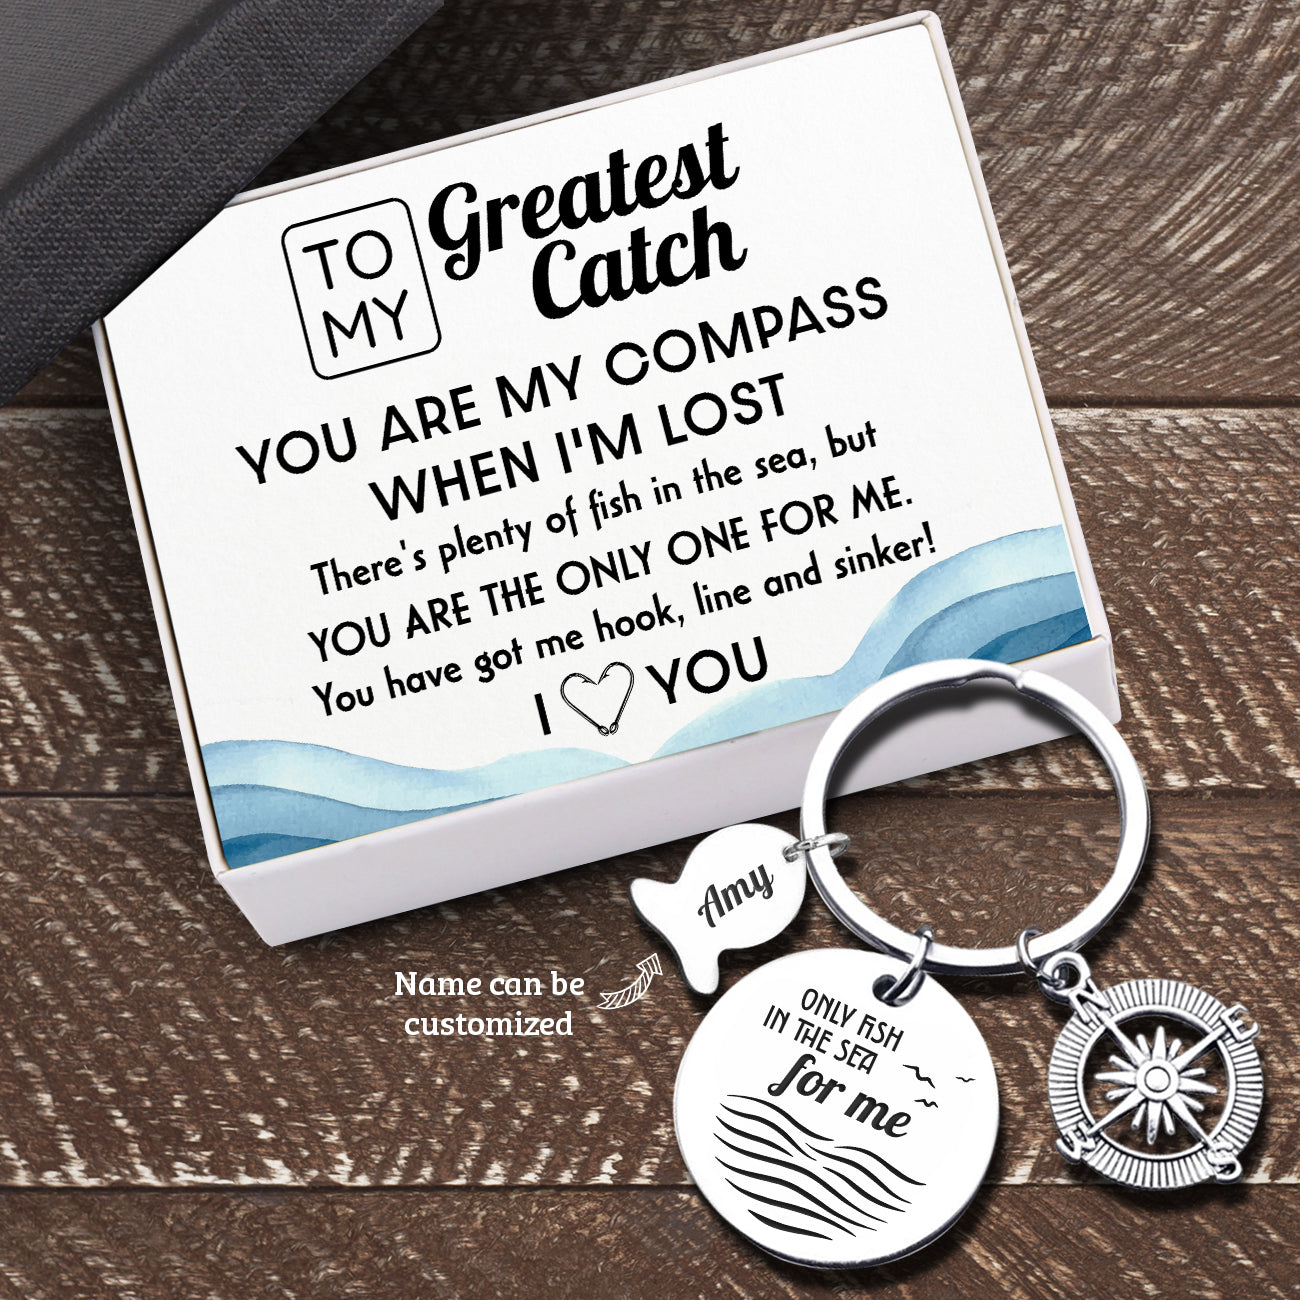 Personalised Fishing Compass Keychain - Fishing - To My Greatest Catch - You Are The Only One For Me - Ukgkwb13002